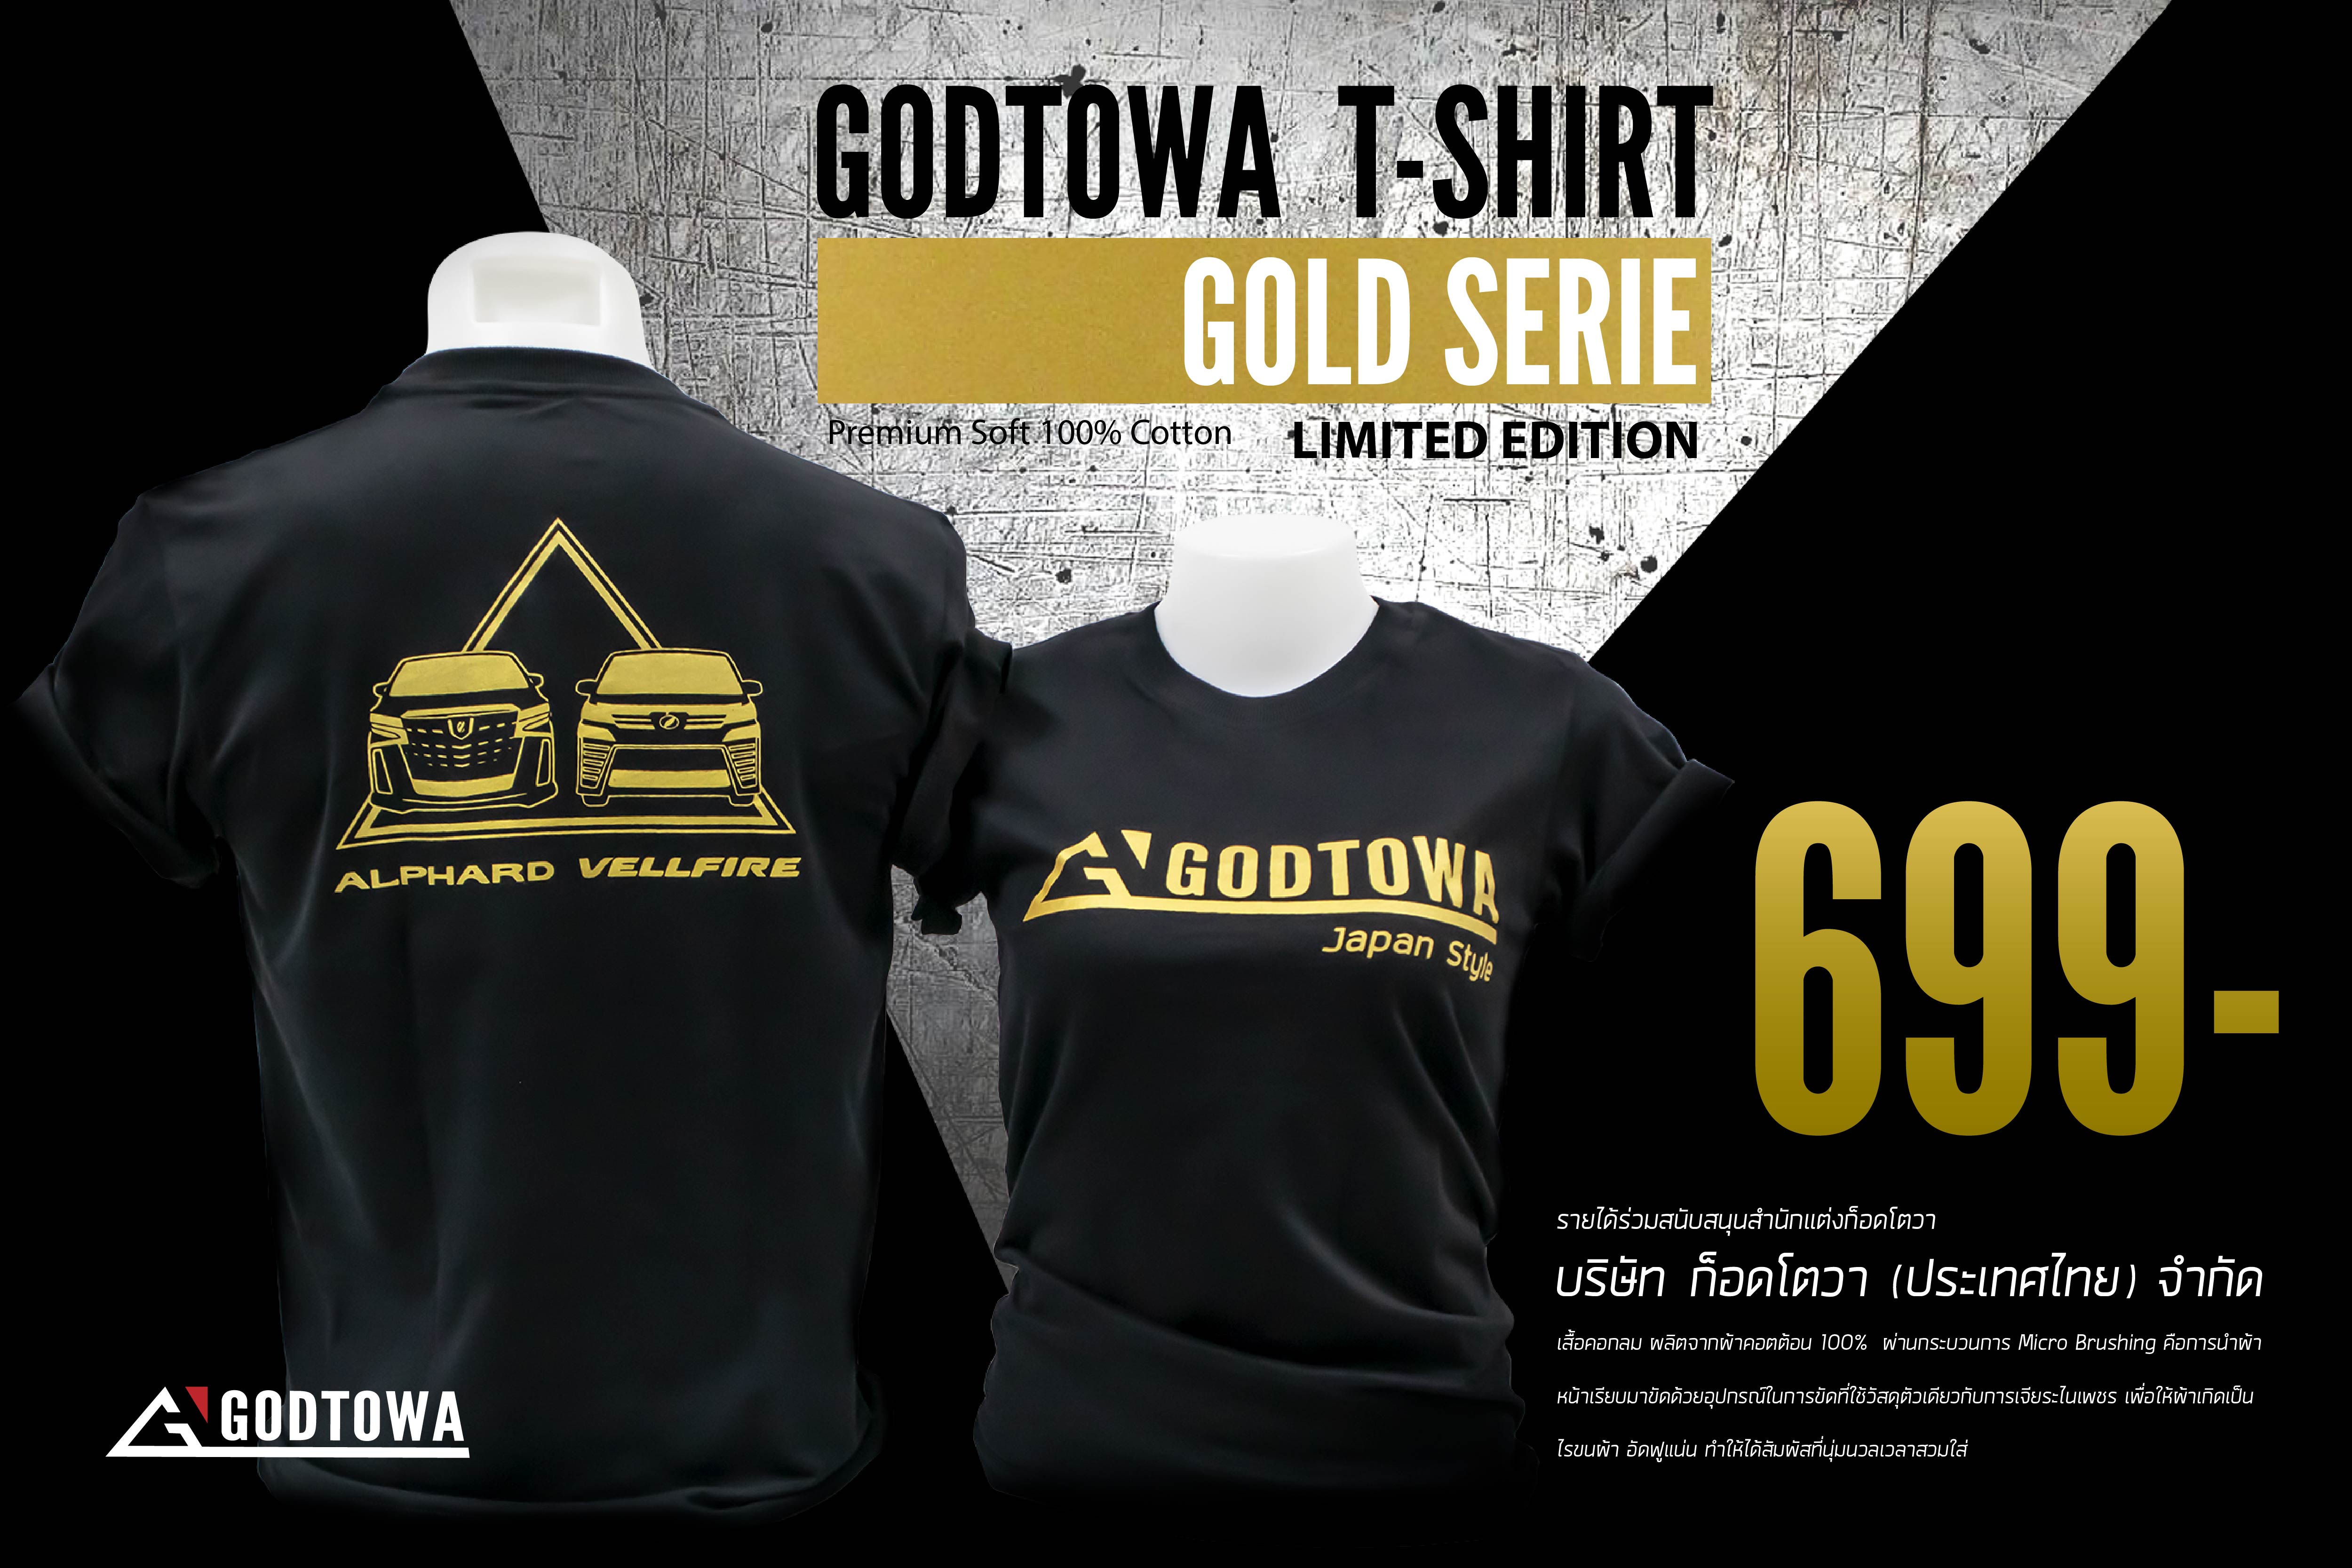 GODTOWA T-Shirt GOLD SERIE LIMITED EDITION